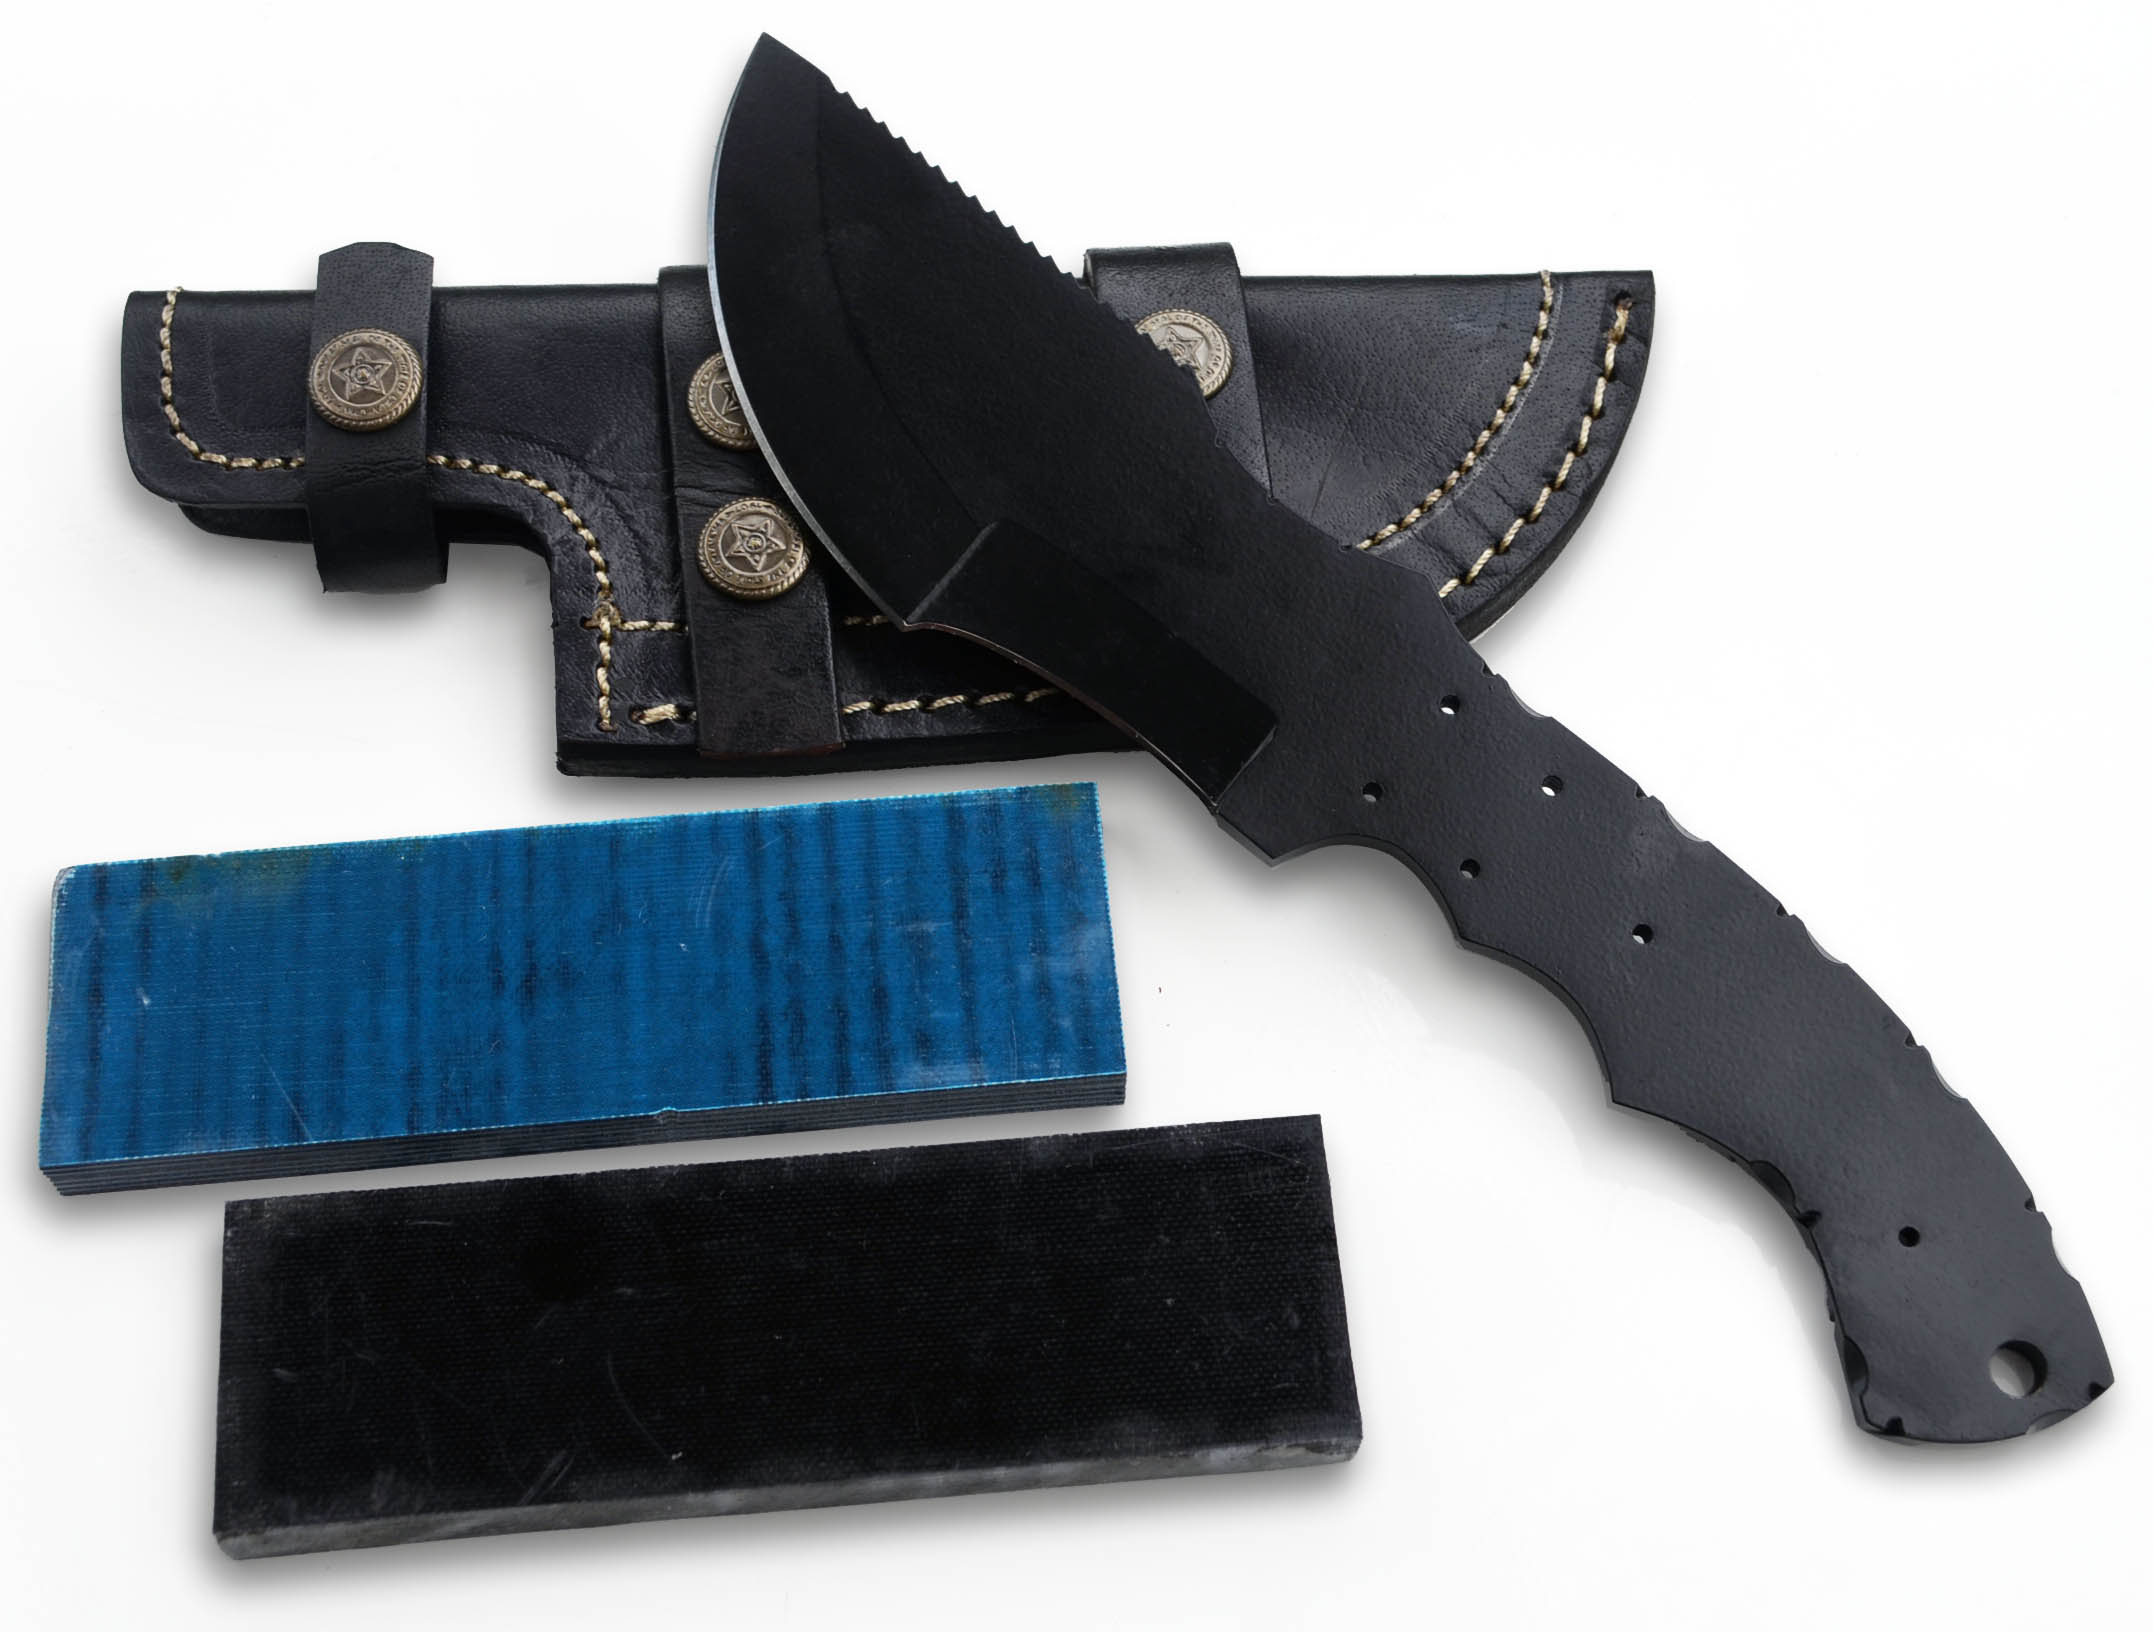 (Knife Kit) Build Your Own Black Tracker Knife with Black & Blue G-10 Handles Combo Blank Hunting